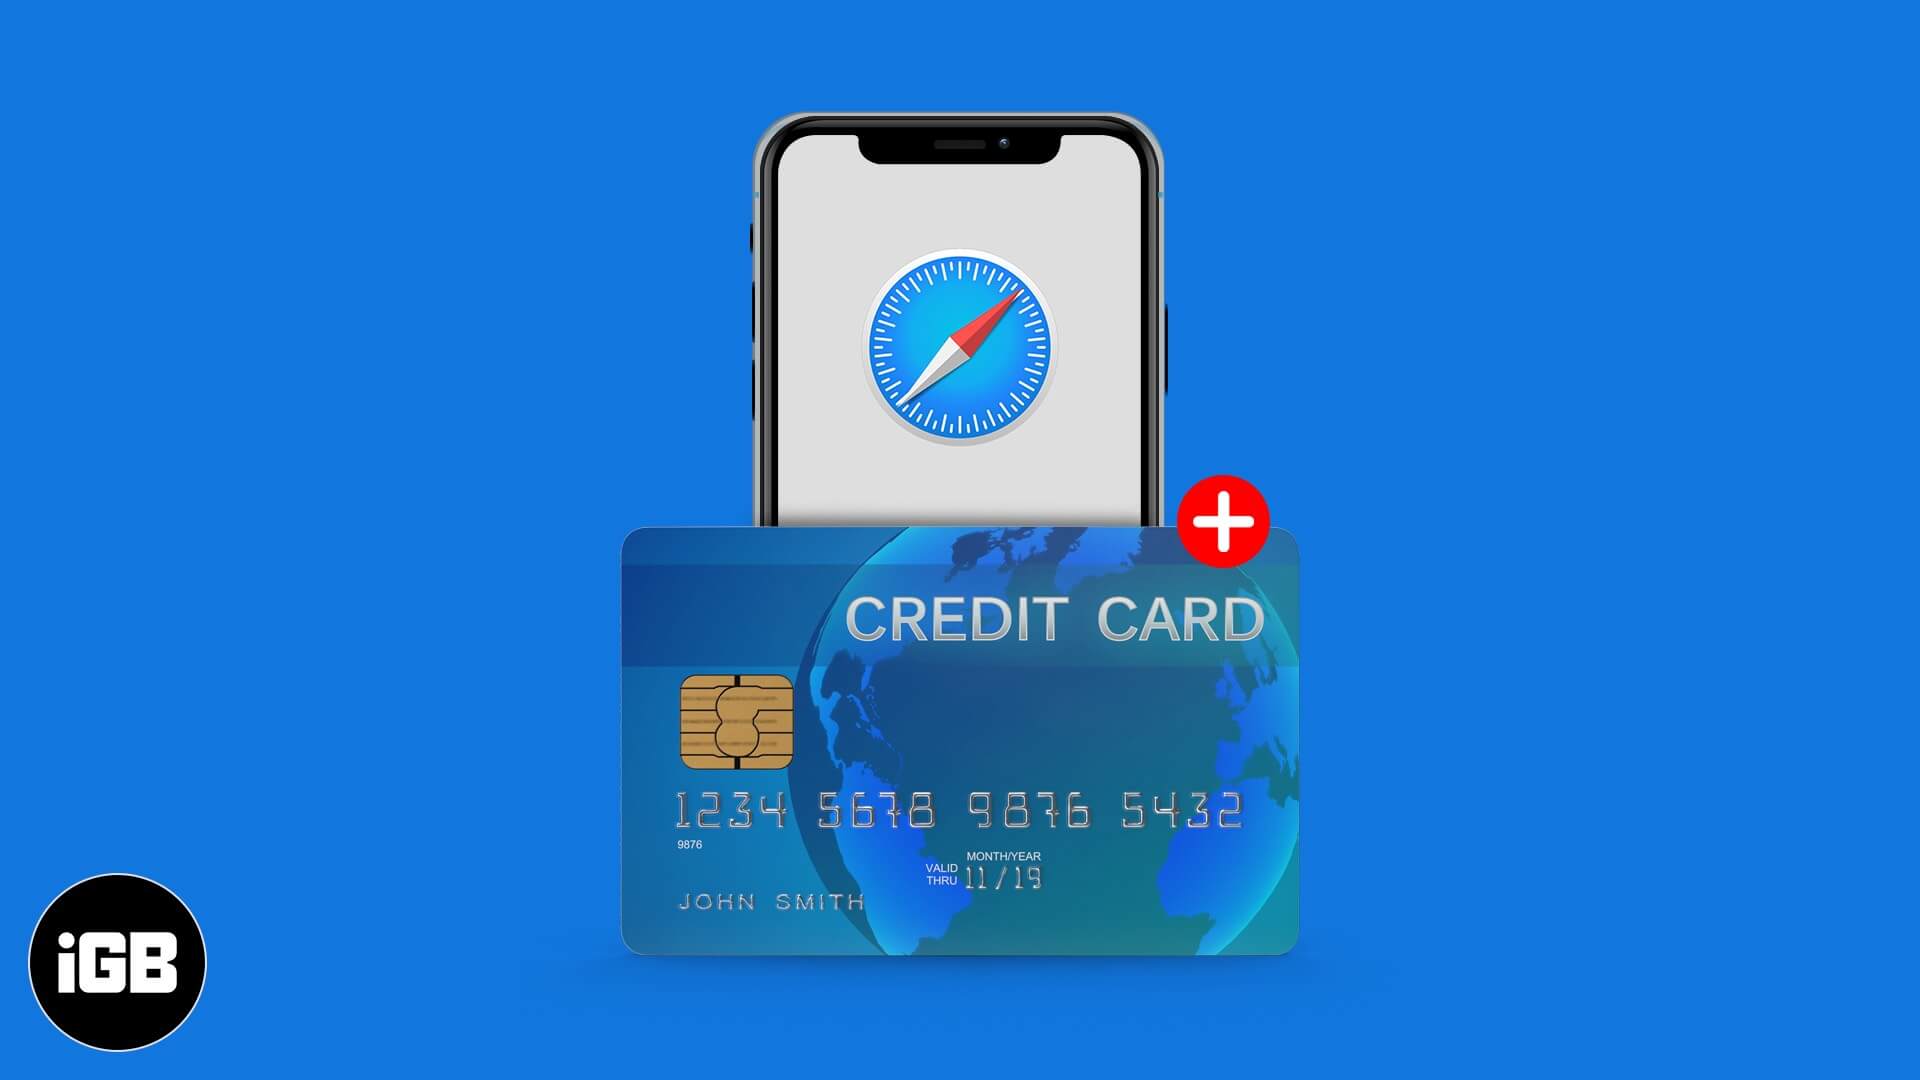 How to add credit cards to safari autofill on iphone ipad and mac